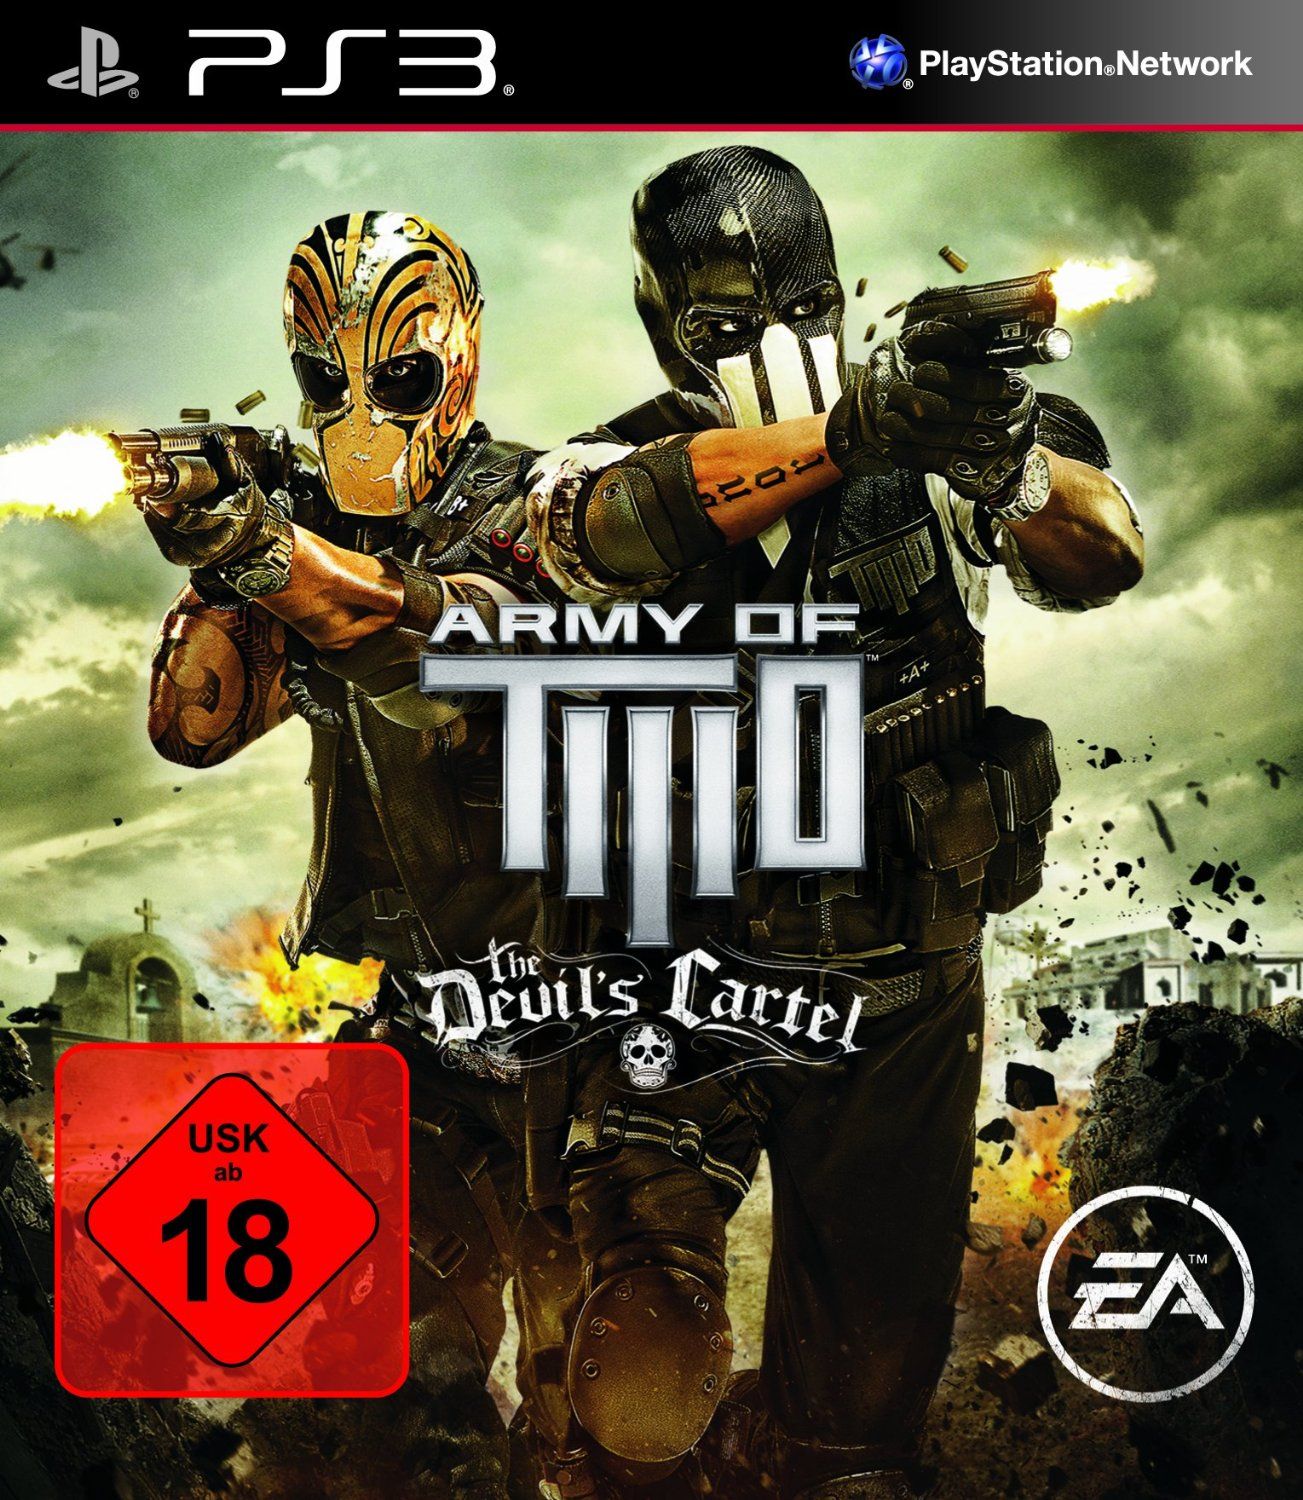 Игры на 2 ps3. Диск Army of two ps3. Army of two ps3 обложка. Army of two the Devil s Cartel ps3. Army of two Xbox 360.